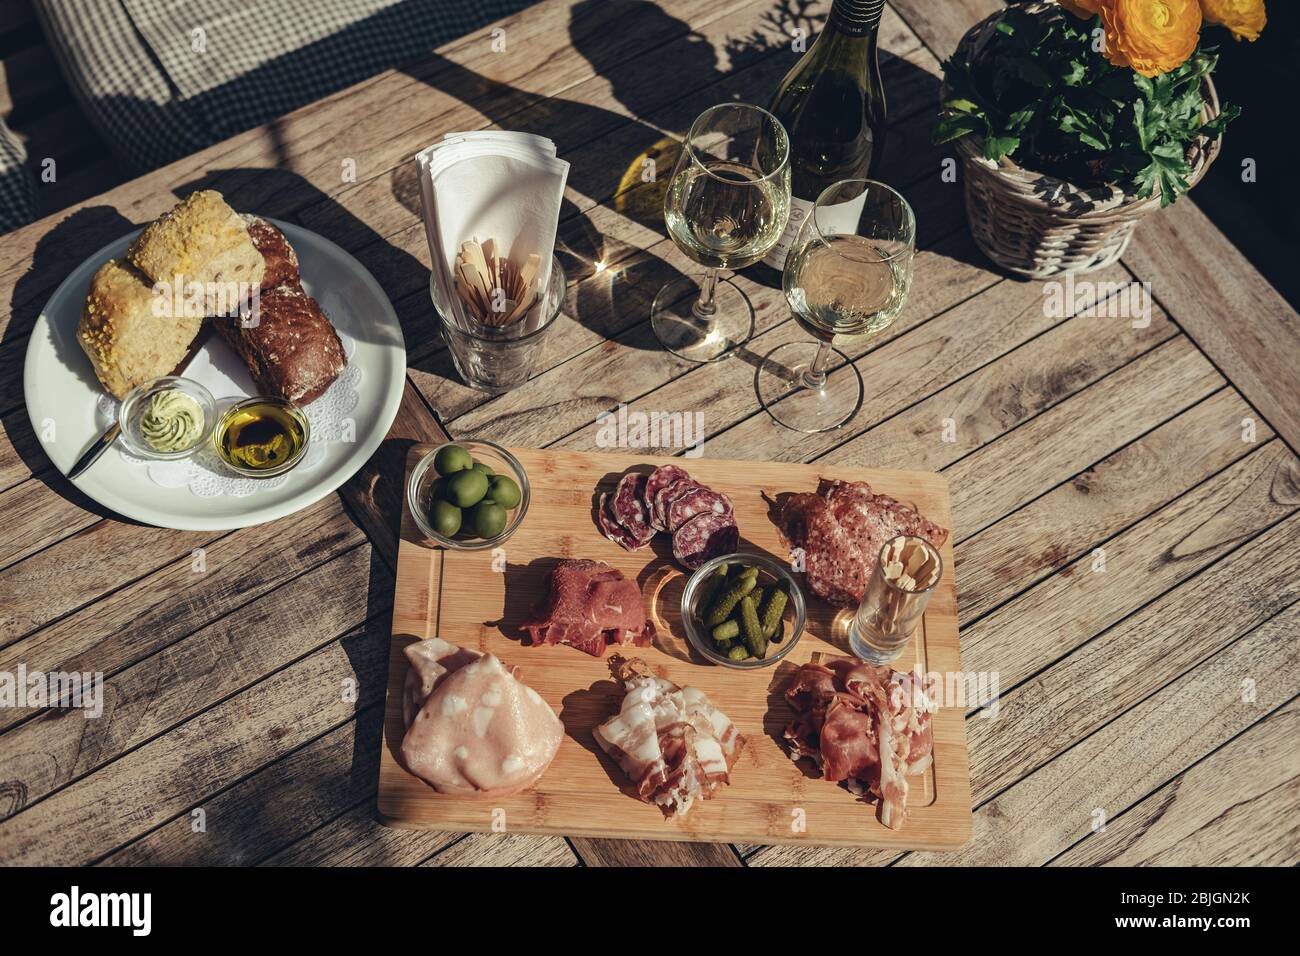 Charcuterie board served with white wine outdoors.  A platter of ham & bacon slices with pickles on a wooden board Stock Photo